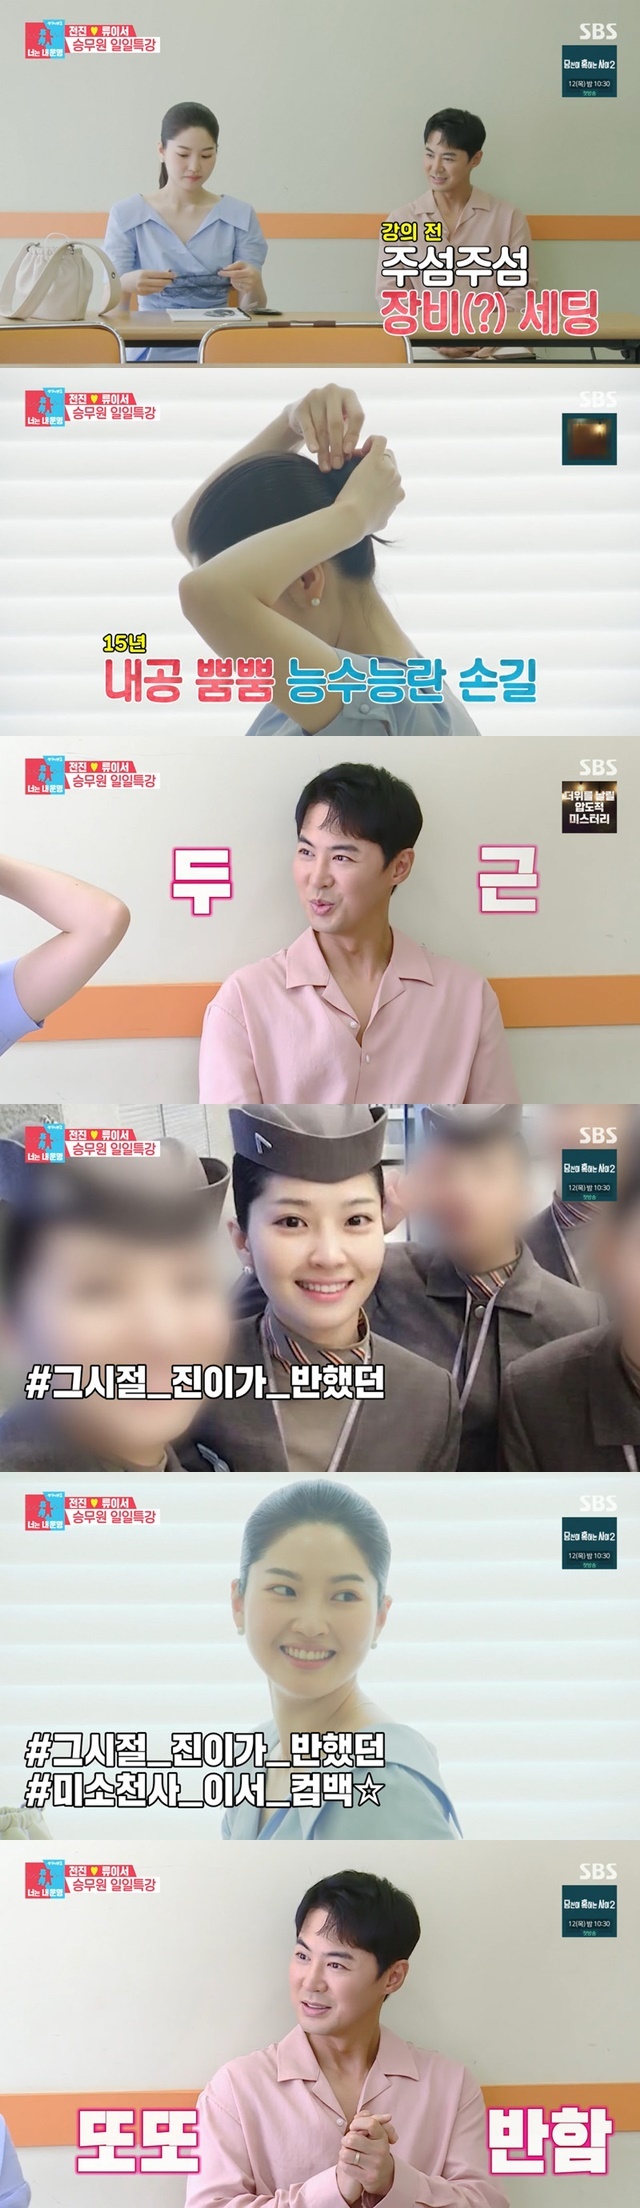 Jun Jin fell in love again when Ryu-yool Lee made Stewardess hair.On August 9, SBS Sangsangmong Season 2 - You Are My Destiny, the couple of Jun Jin Ryu Seo-young Lee visited Stewardess Academy.Im shaking, said Ryu, heading to the Stewardess Academy, and Jun Jin worried, Are you shaking the penthouse? Is this trembling?Ryu-yool Lee Stewardess said, You are still pretty, and expressed expectations that you are expecting and loving students.I didnt know I was going to do this, said Ryu. Ive been a Stewardess for 15 years, and Ive been wearing a net on my head without looking at a mirror, and Jun Jin said, Im free to do my hair these days, but I feel like Stewardess because I have this hair.